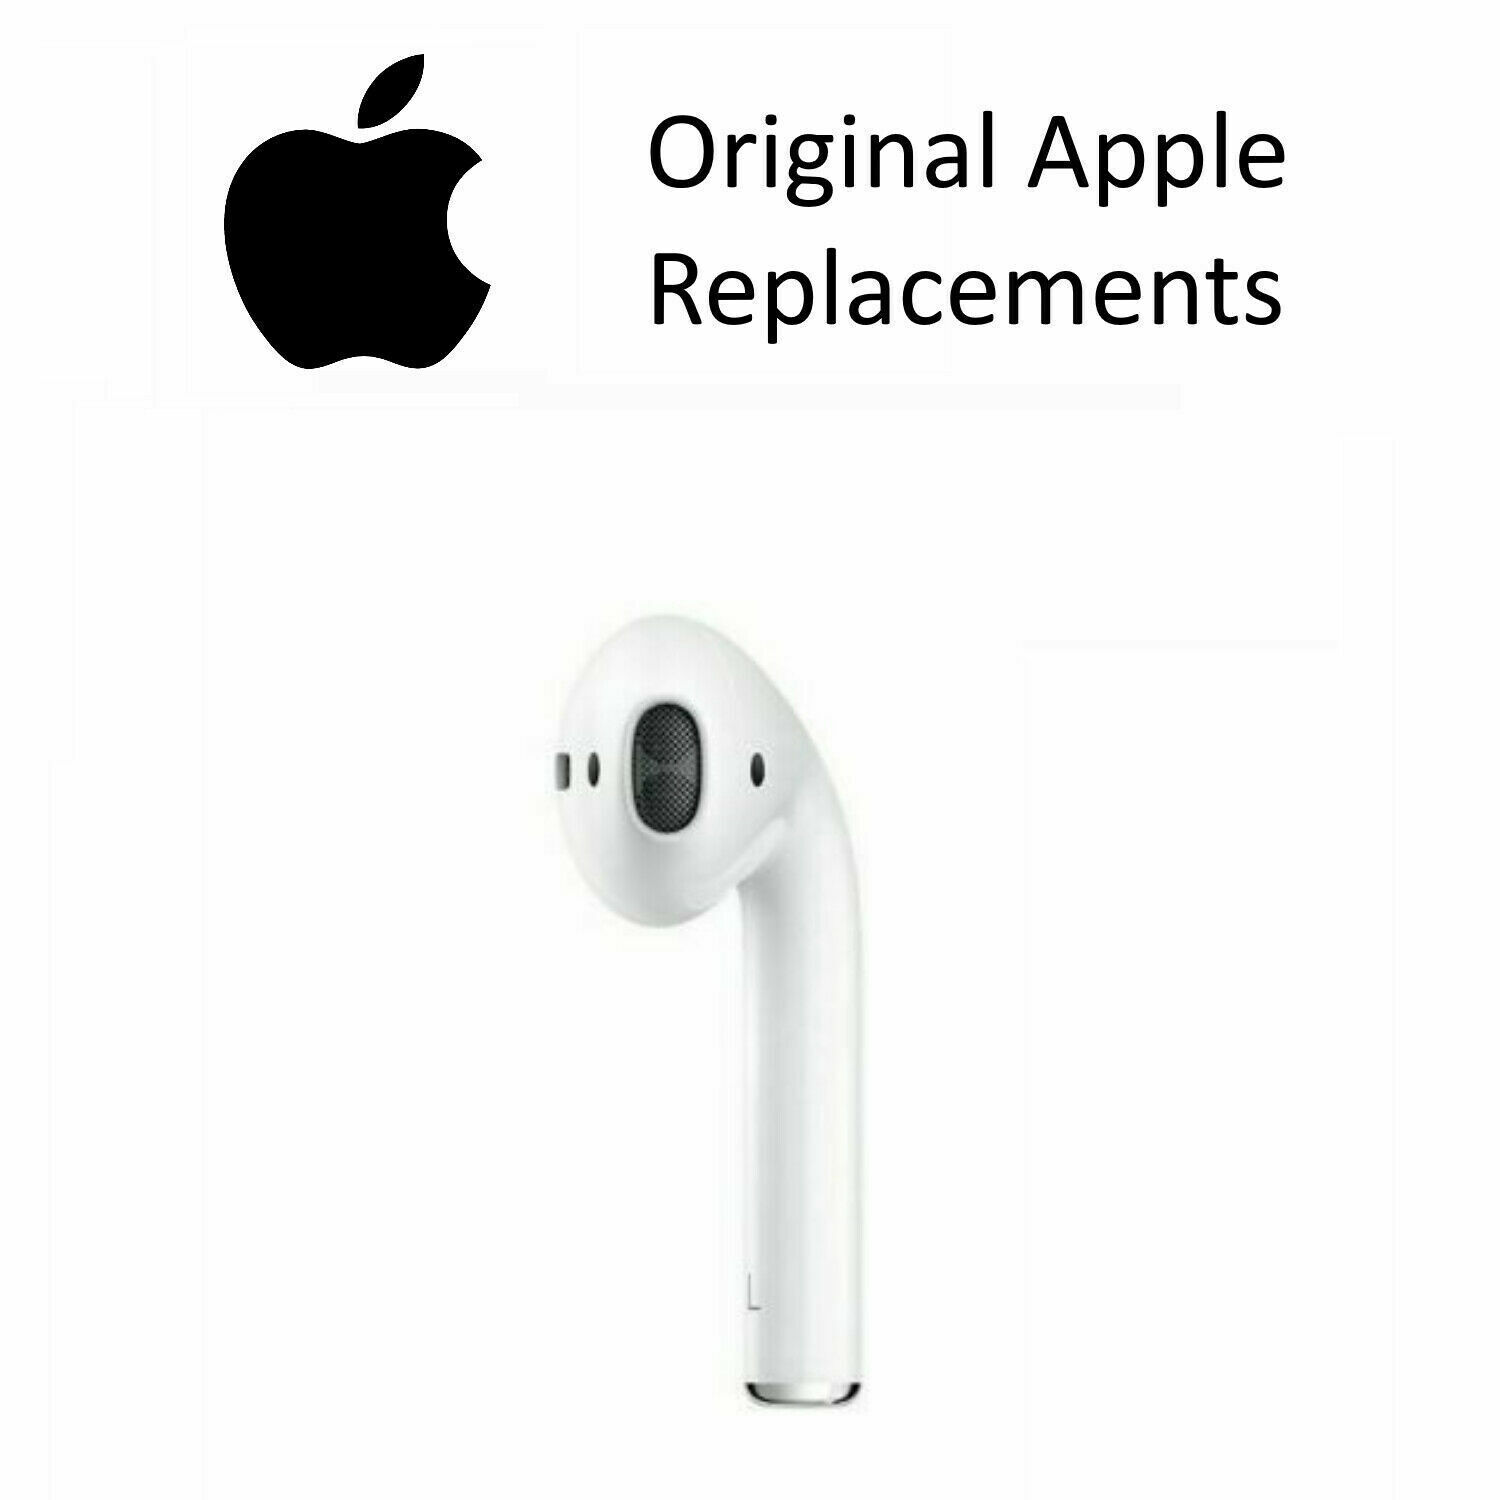 bottle heaven Expert Geuine Apple Airpods 2nd Generation Left Right Case Replacements A2031 A2032  | eBay